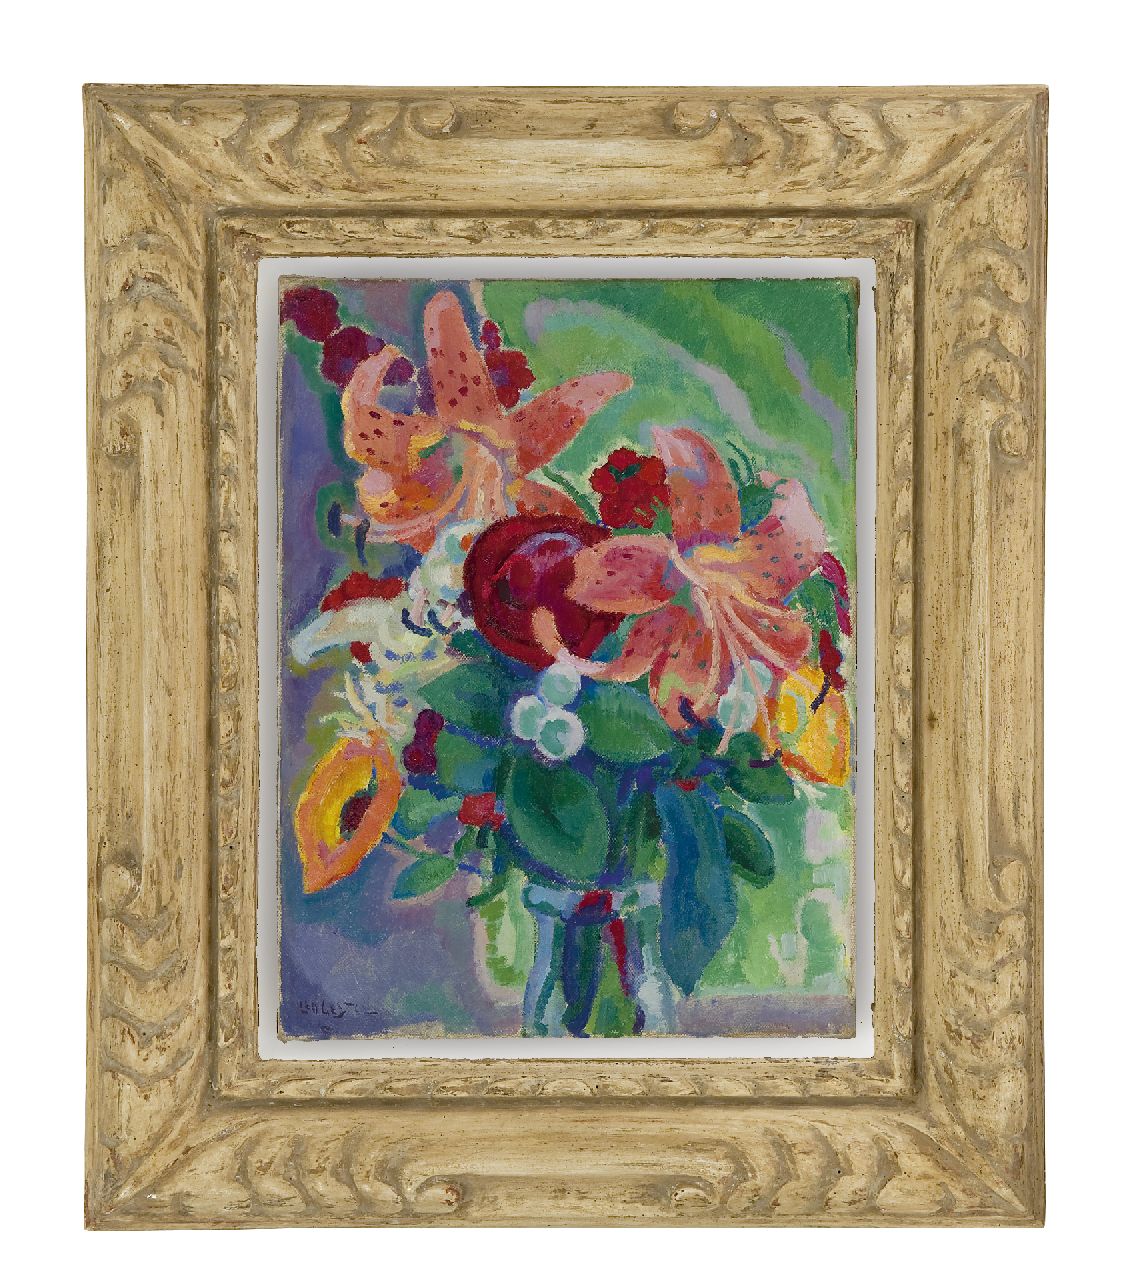 Gestel L.  | Leendert 'Leo' Gestel, Flower still life with tiger lilies, oil on canvas 33.3 x 25.3 cm, signed l.l. and painted ca. 1912-1913